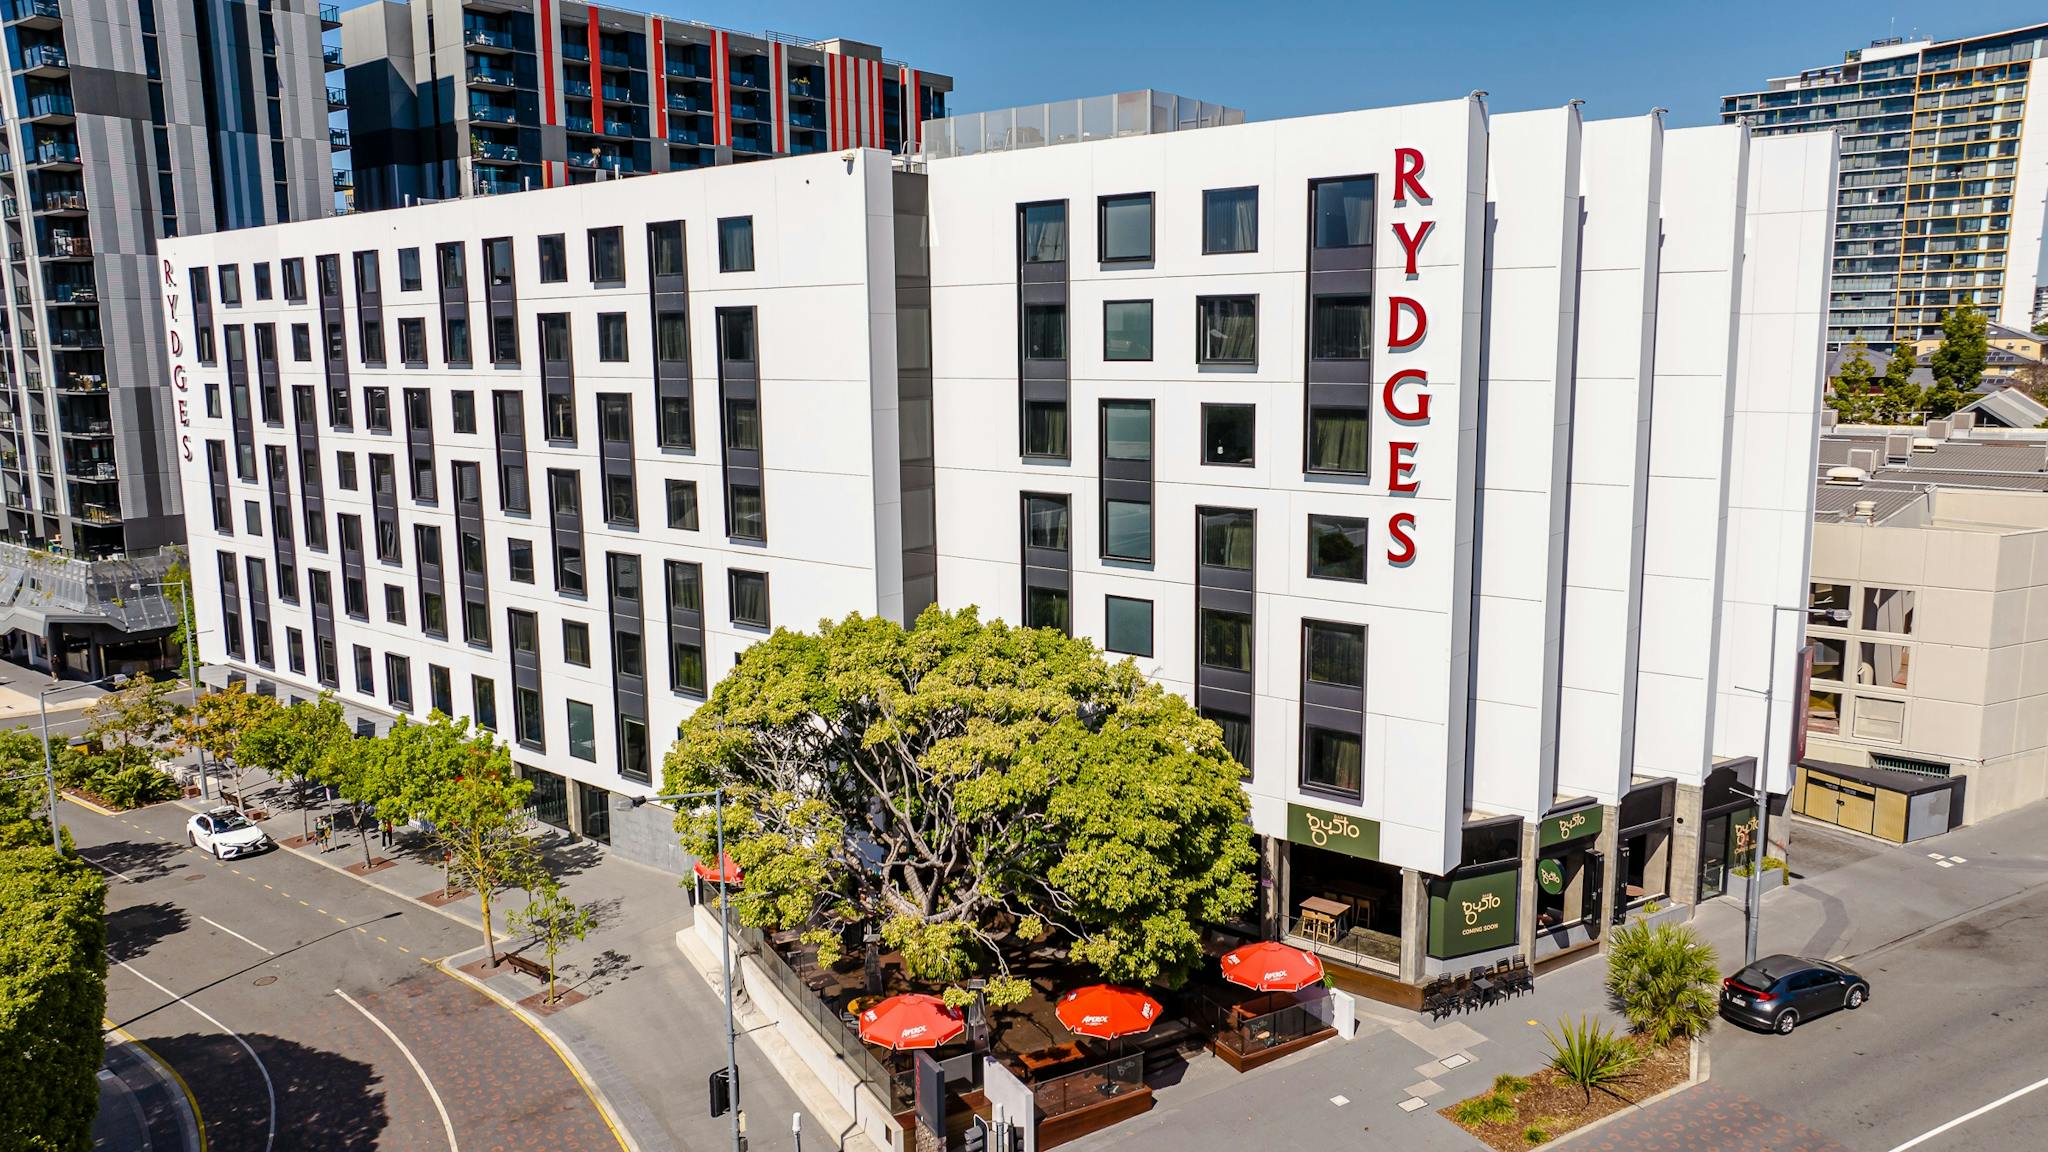 Rydges Fortitude Valley exterior